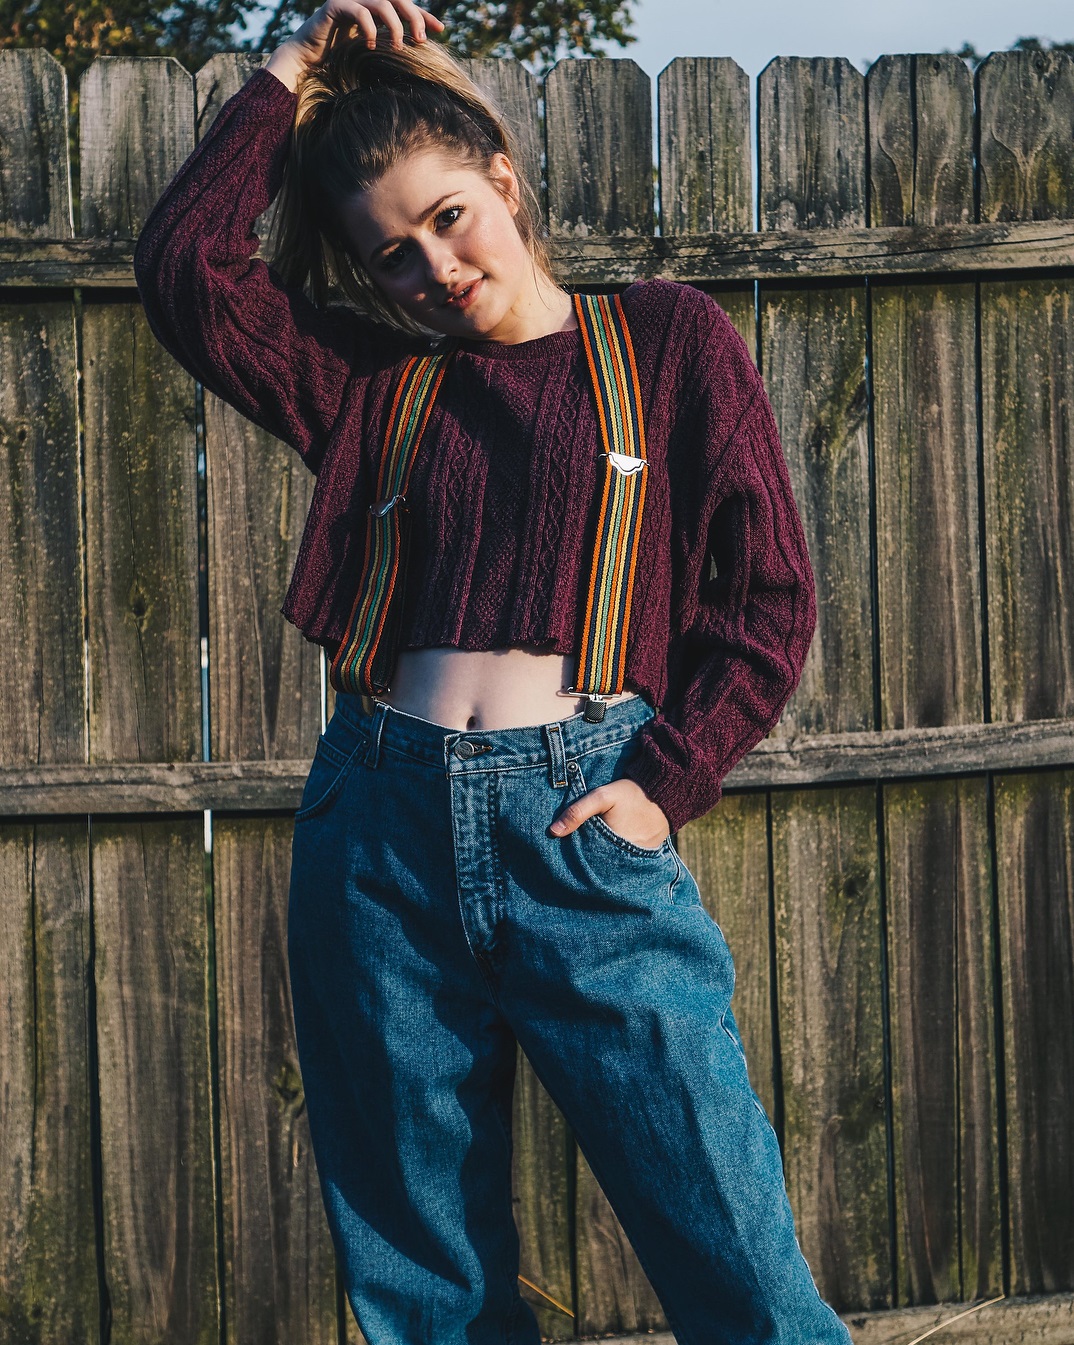 Chic Handmade Cropped Sweater Paired With Baggy Jeans And Funky Belts